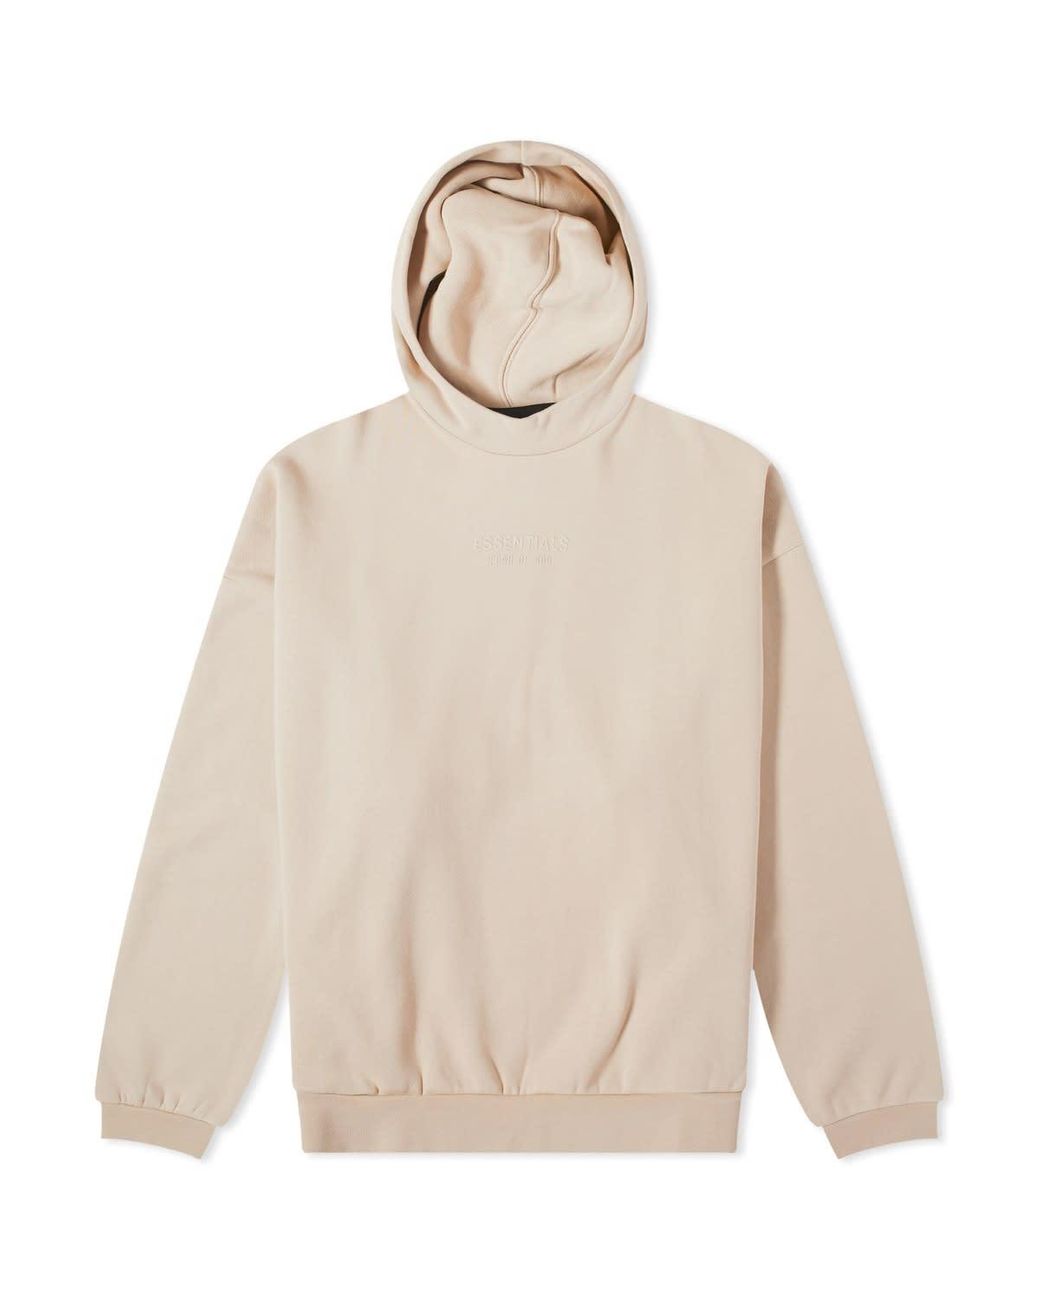 Fear of God ESSENTIALS Essential Hoodie in Natural for Men | Lyst